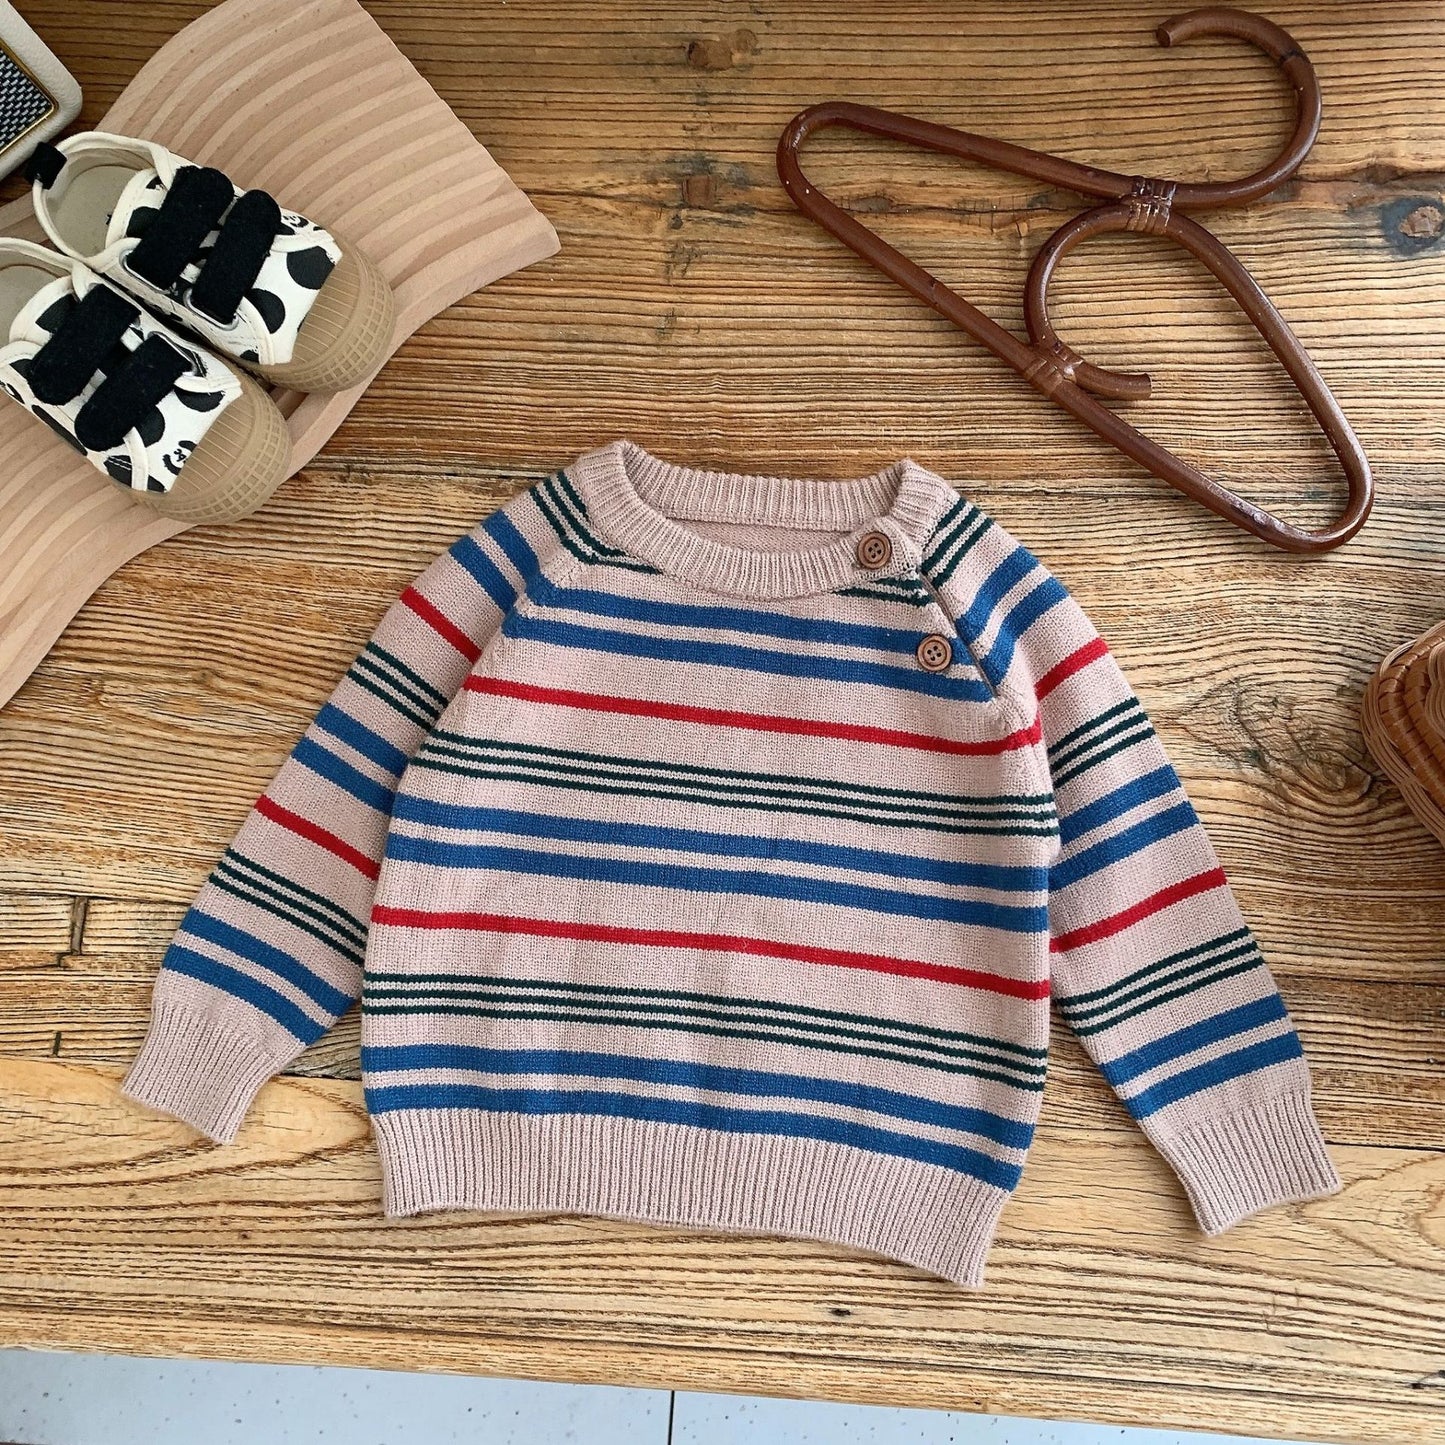 Boy’s Girl's Striped Fuzzy Warm Knit Sweater CrewNeck Pullover Outerwear